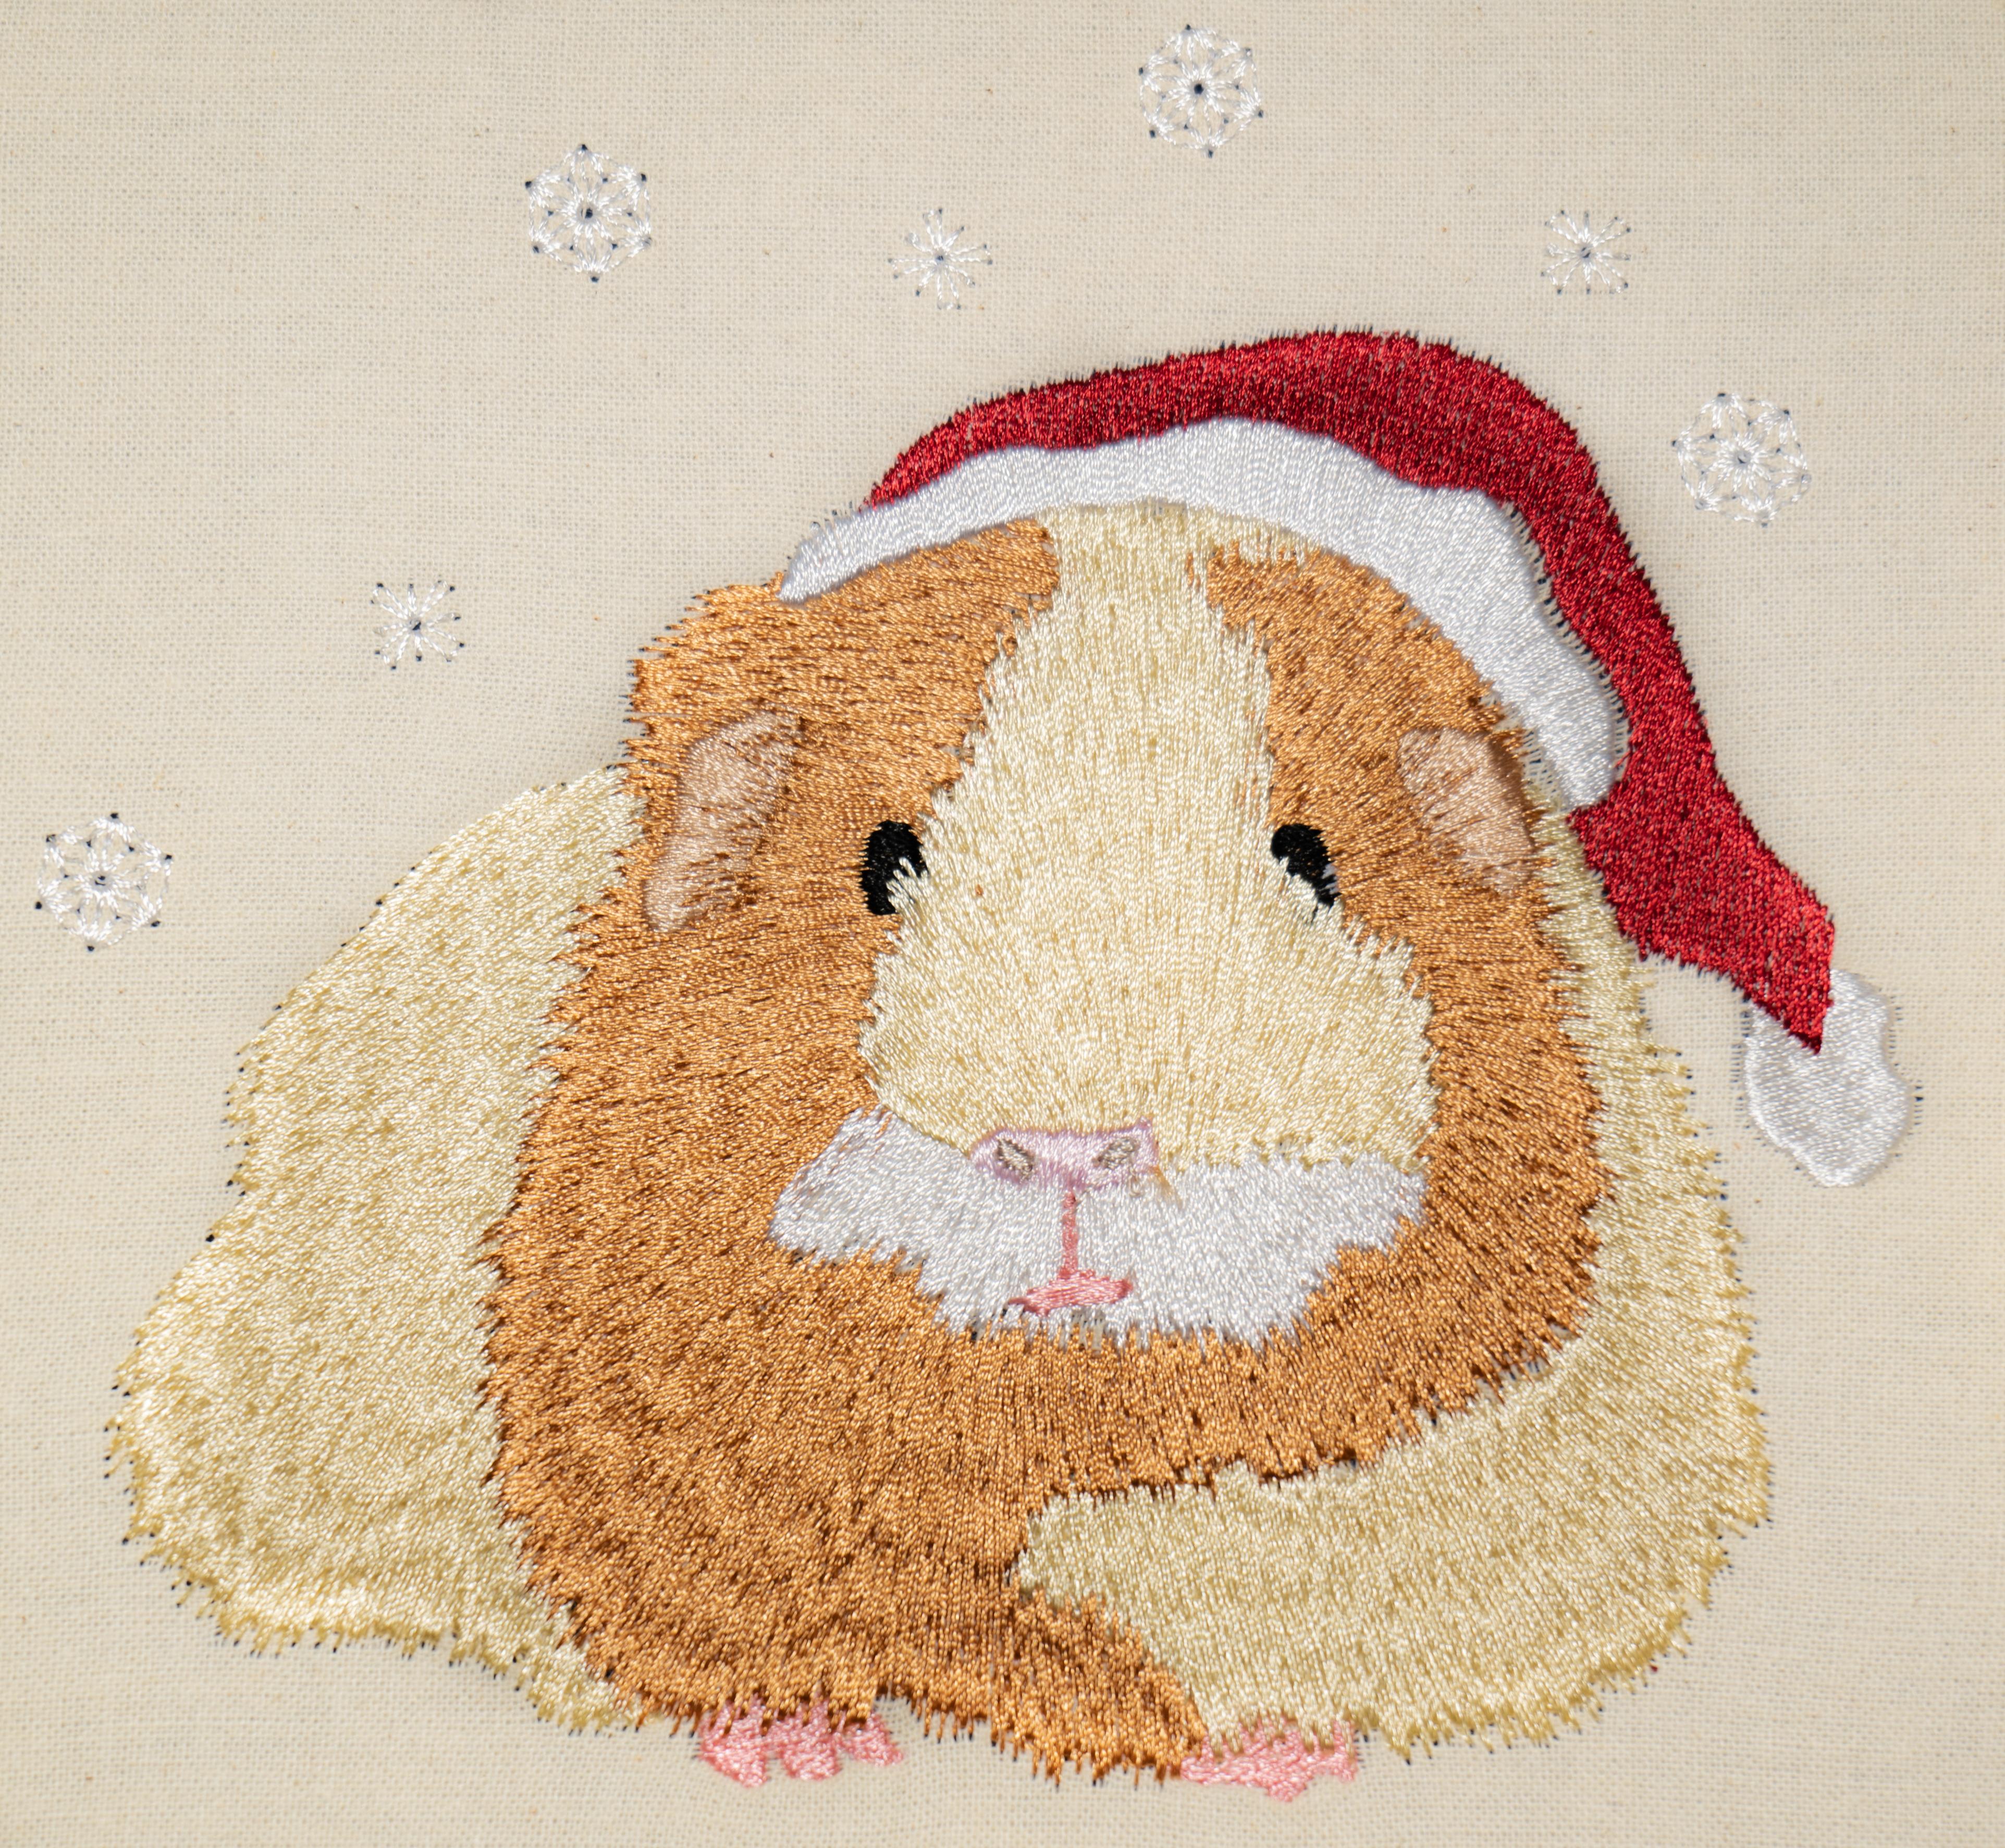 Benny Guinea Pig Machine Embroidery design ready for instant download